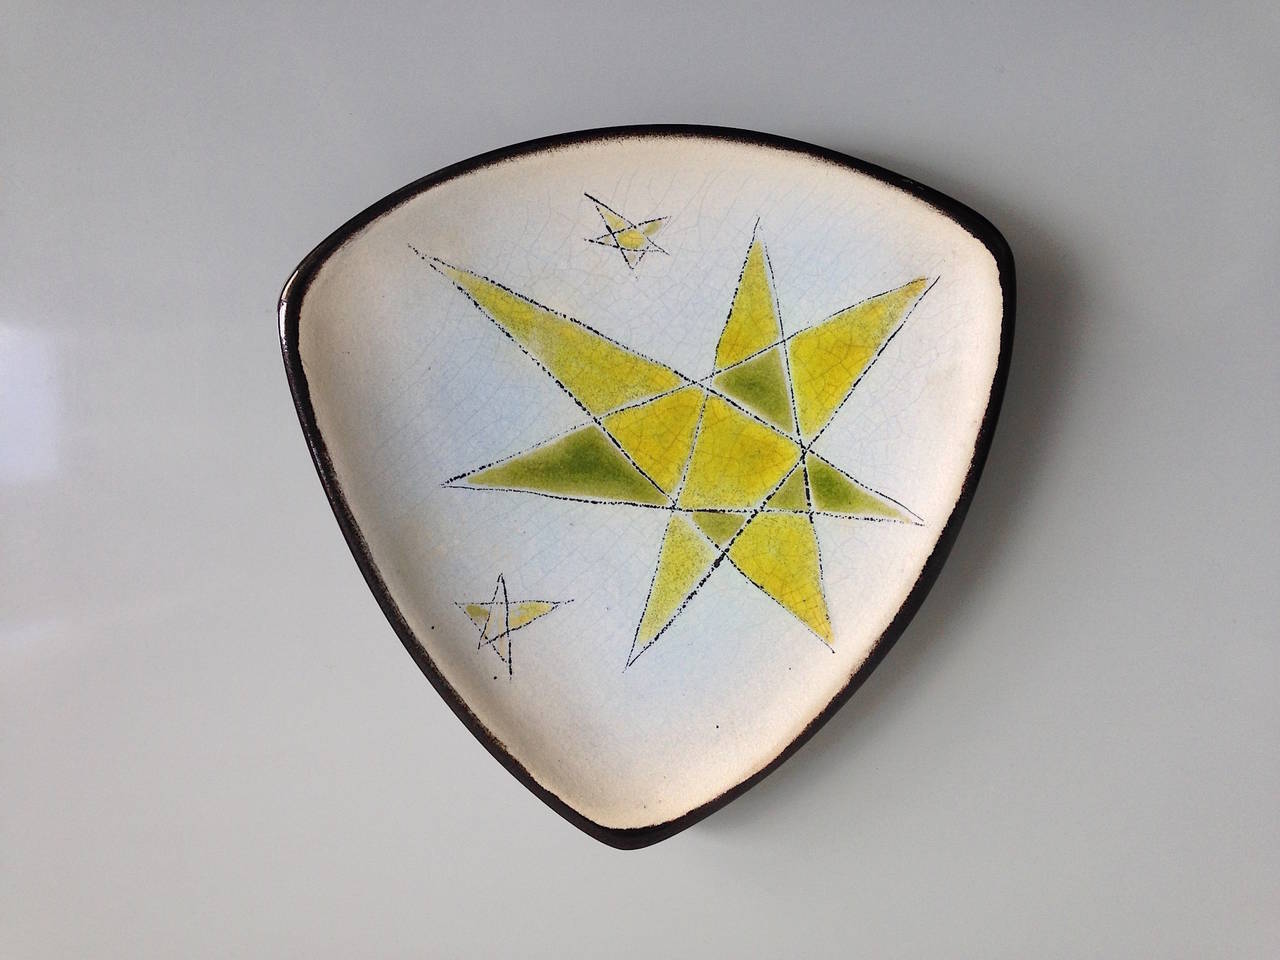 Denise Gatard 1927-1992)

This larger shell is matt white yellow green enameled on the inside and with a shiny black/brown glaze outside. The motiv is in a form of a 